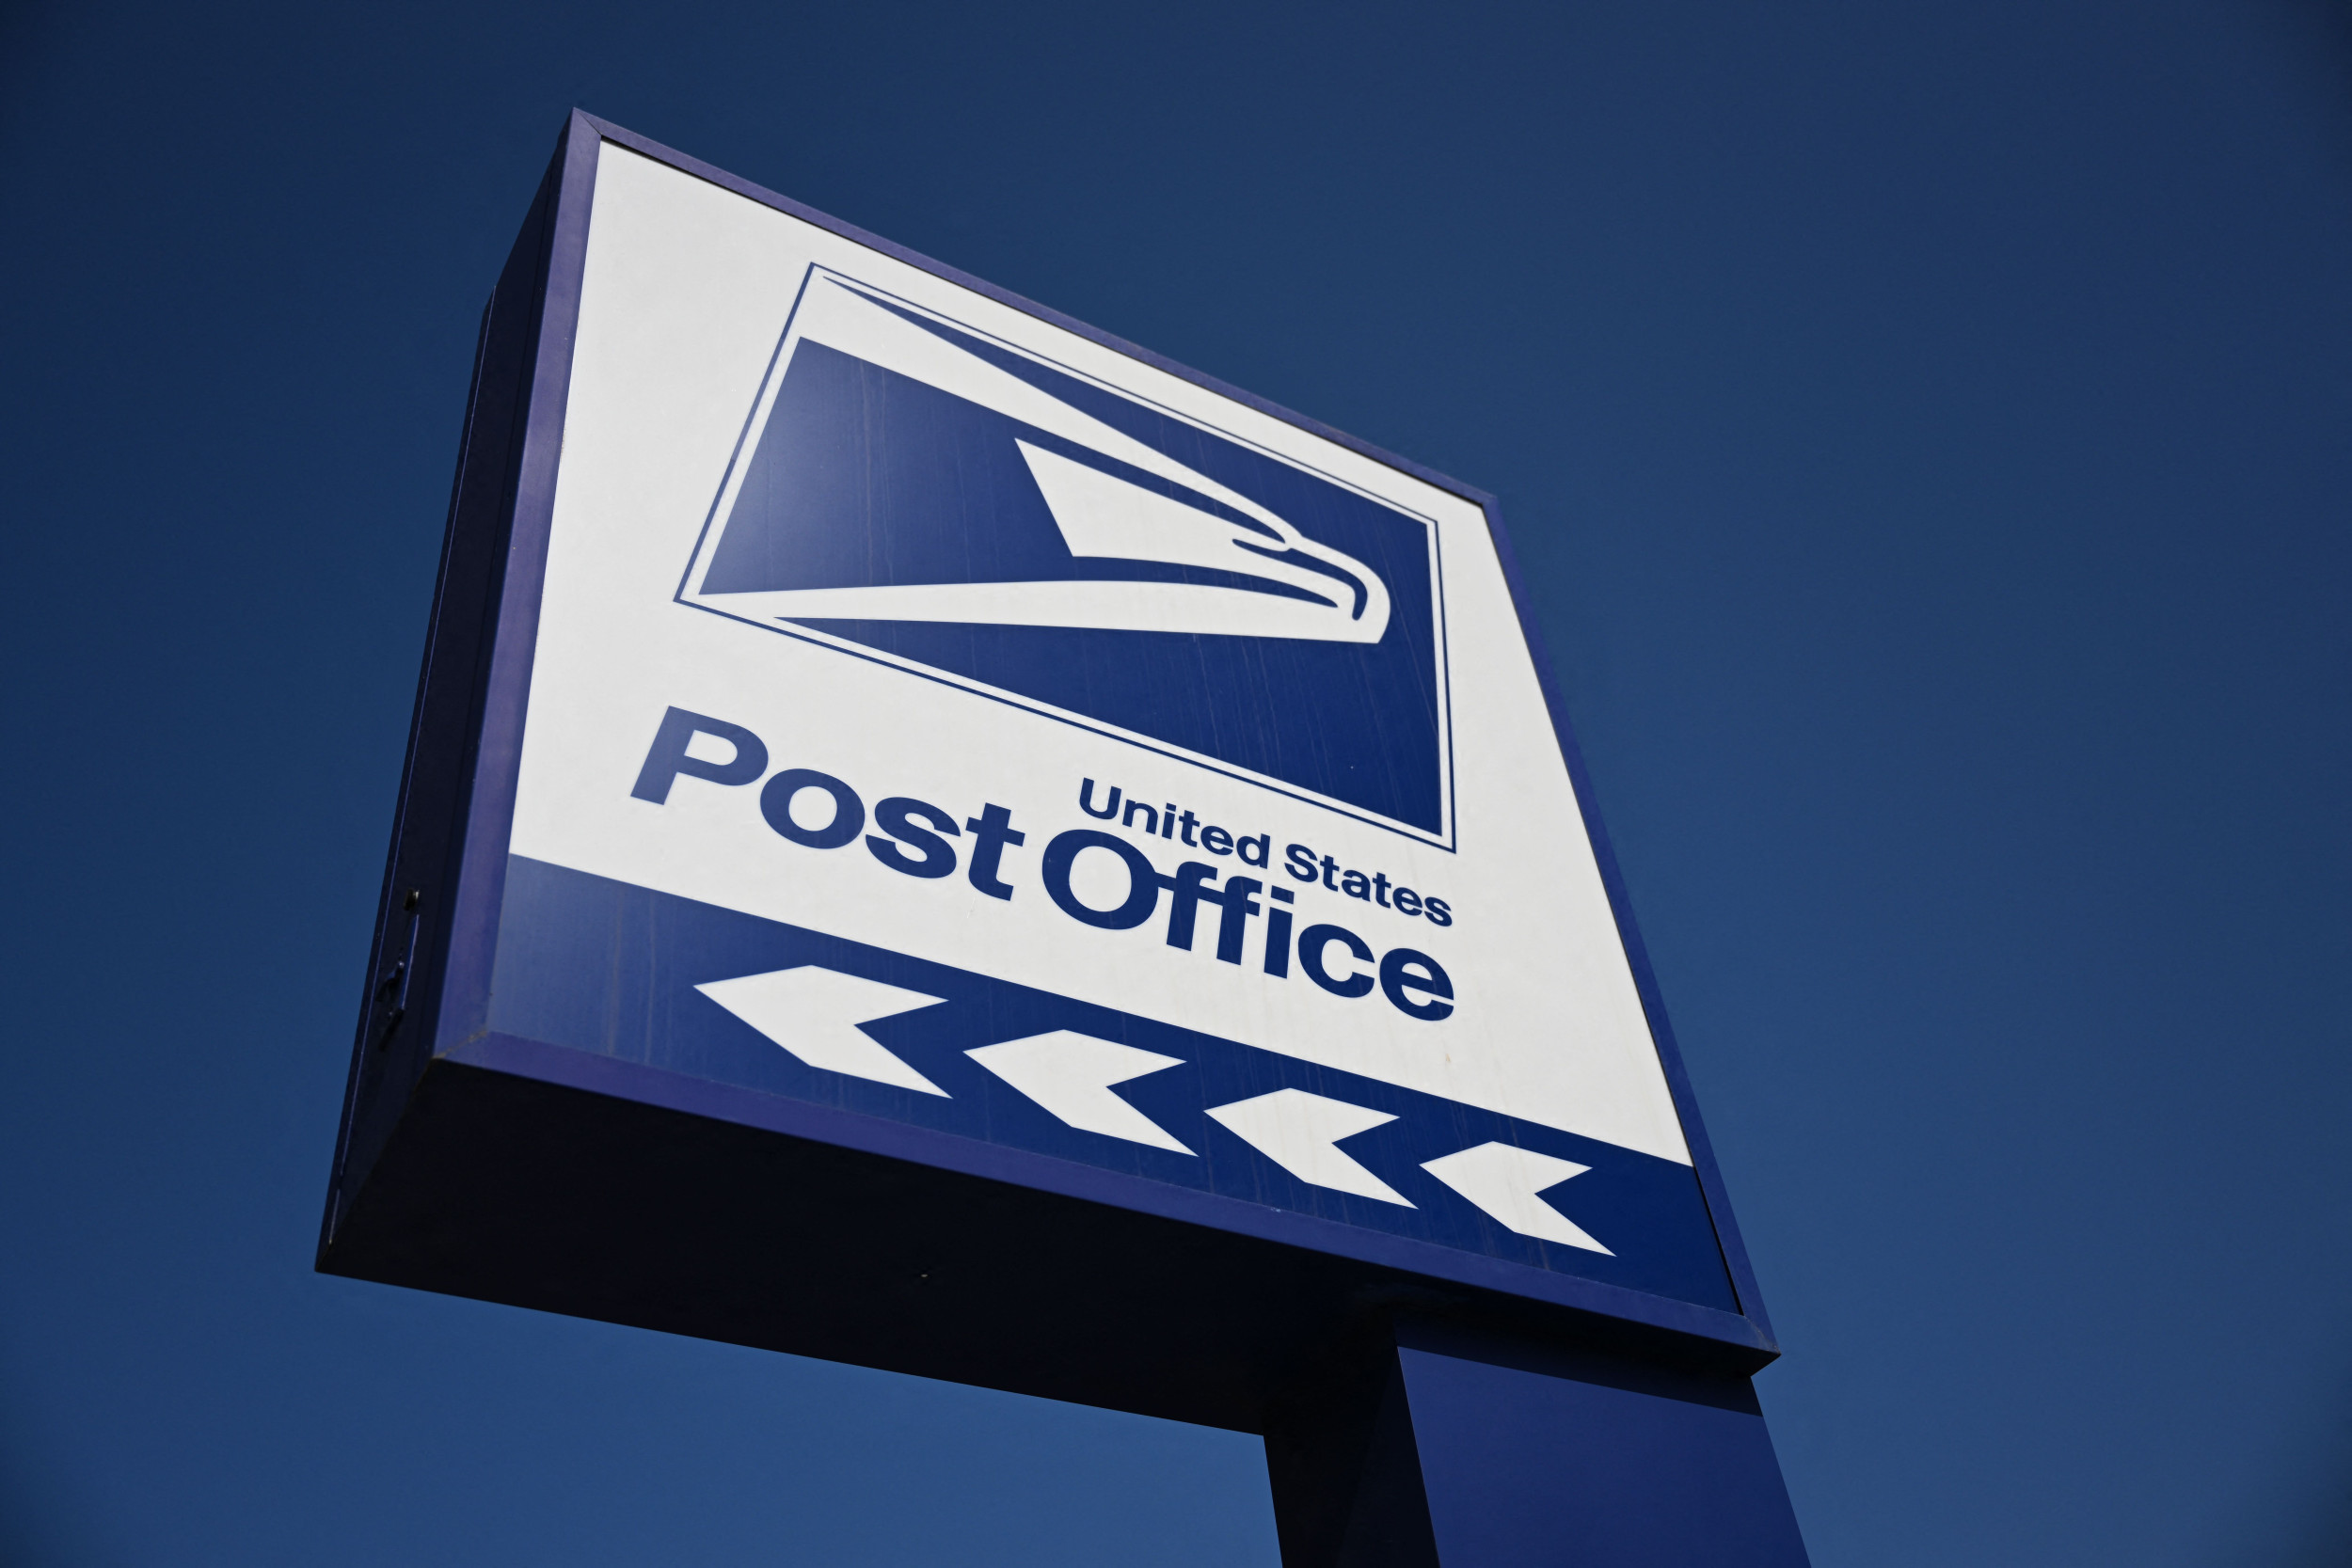 Is There Mail on Presidents Day? USPS, FedEx, UPS Post Office Opening Hours